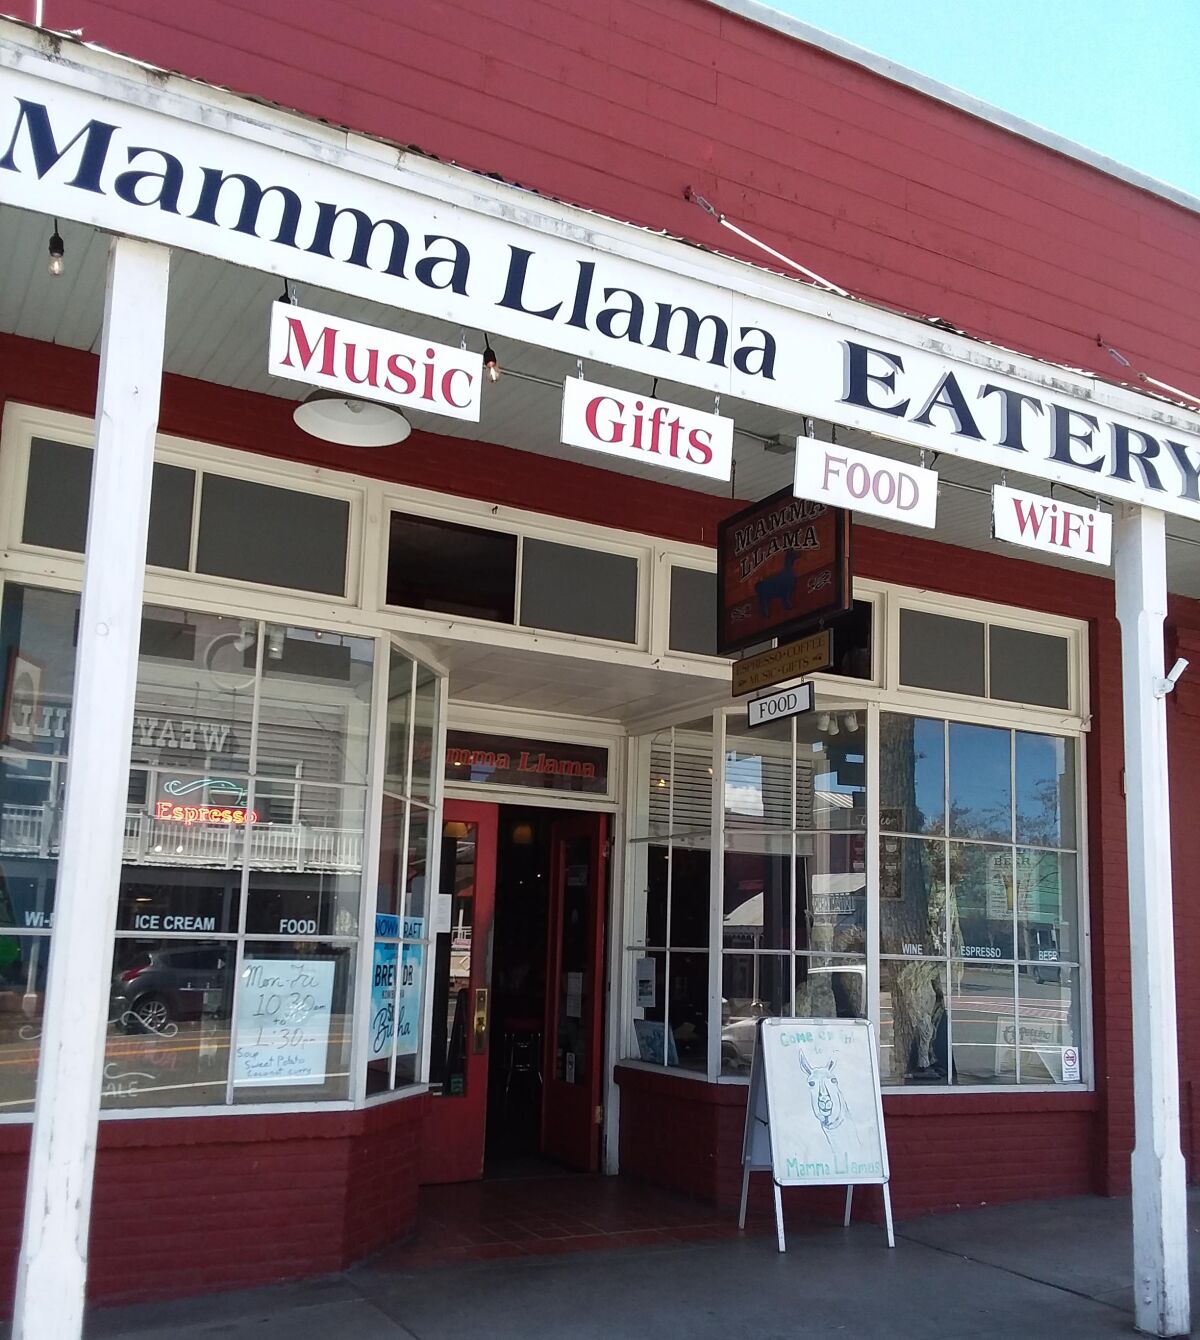 Mamma Llama Eatery and Cafe in Weaverville